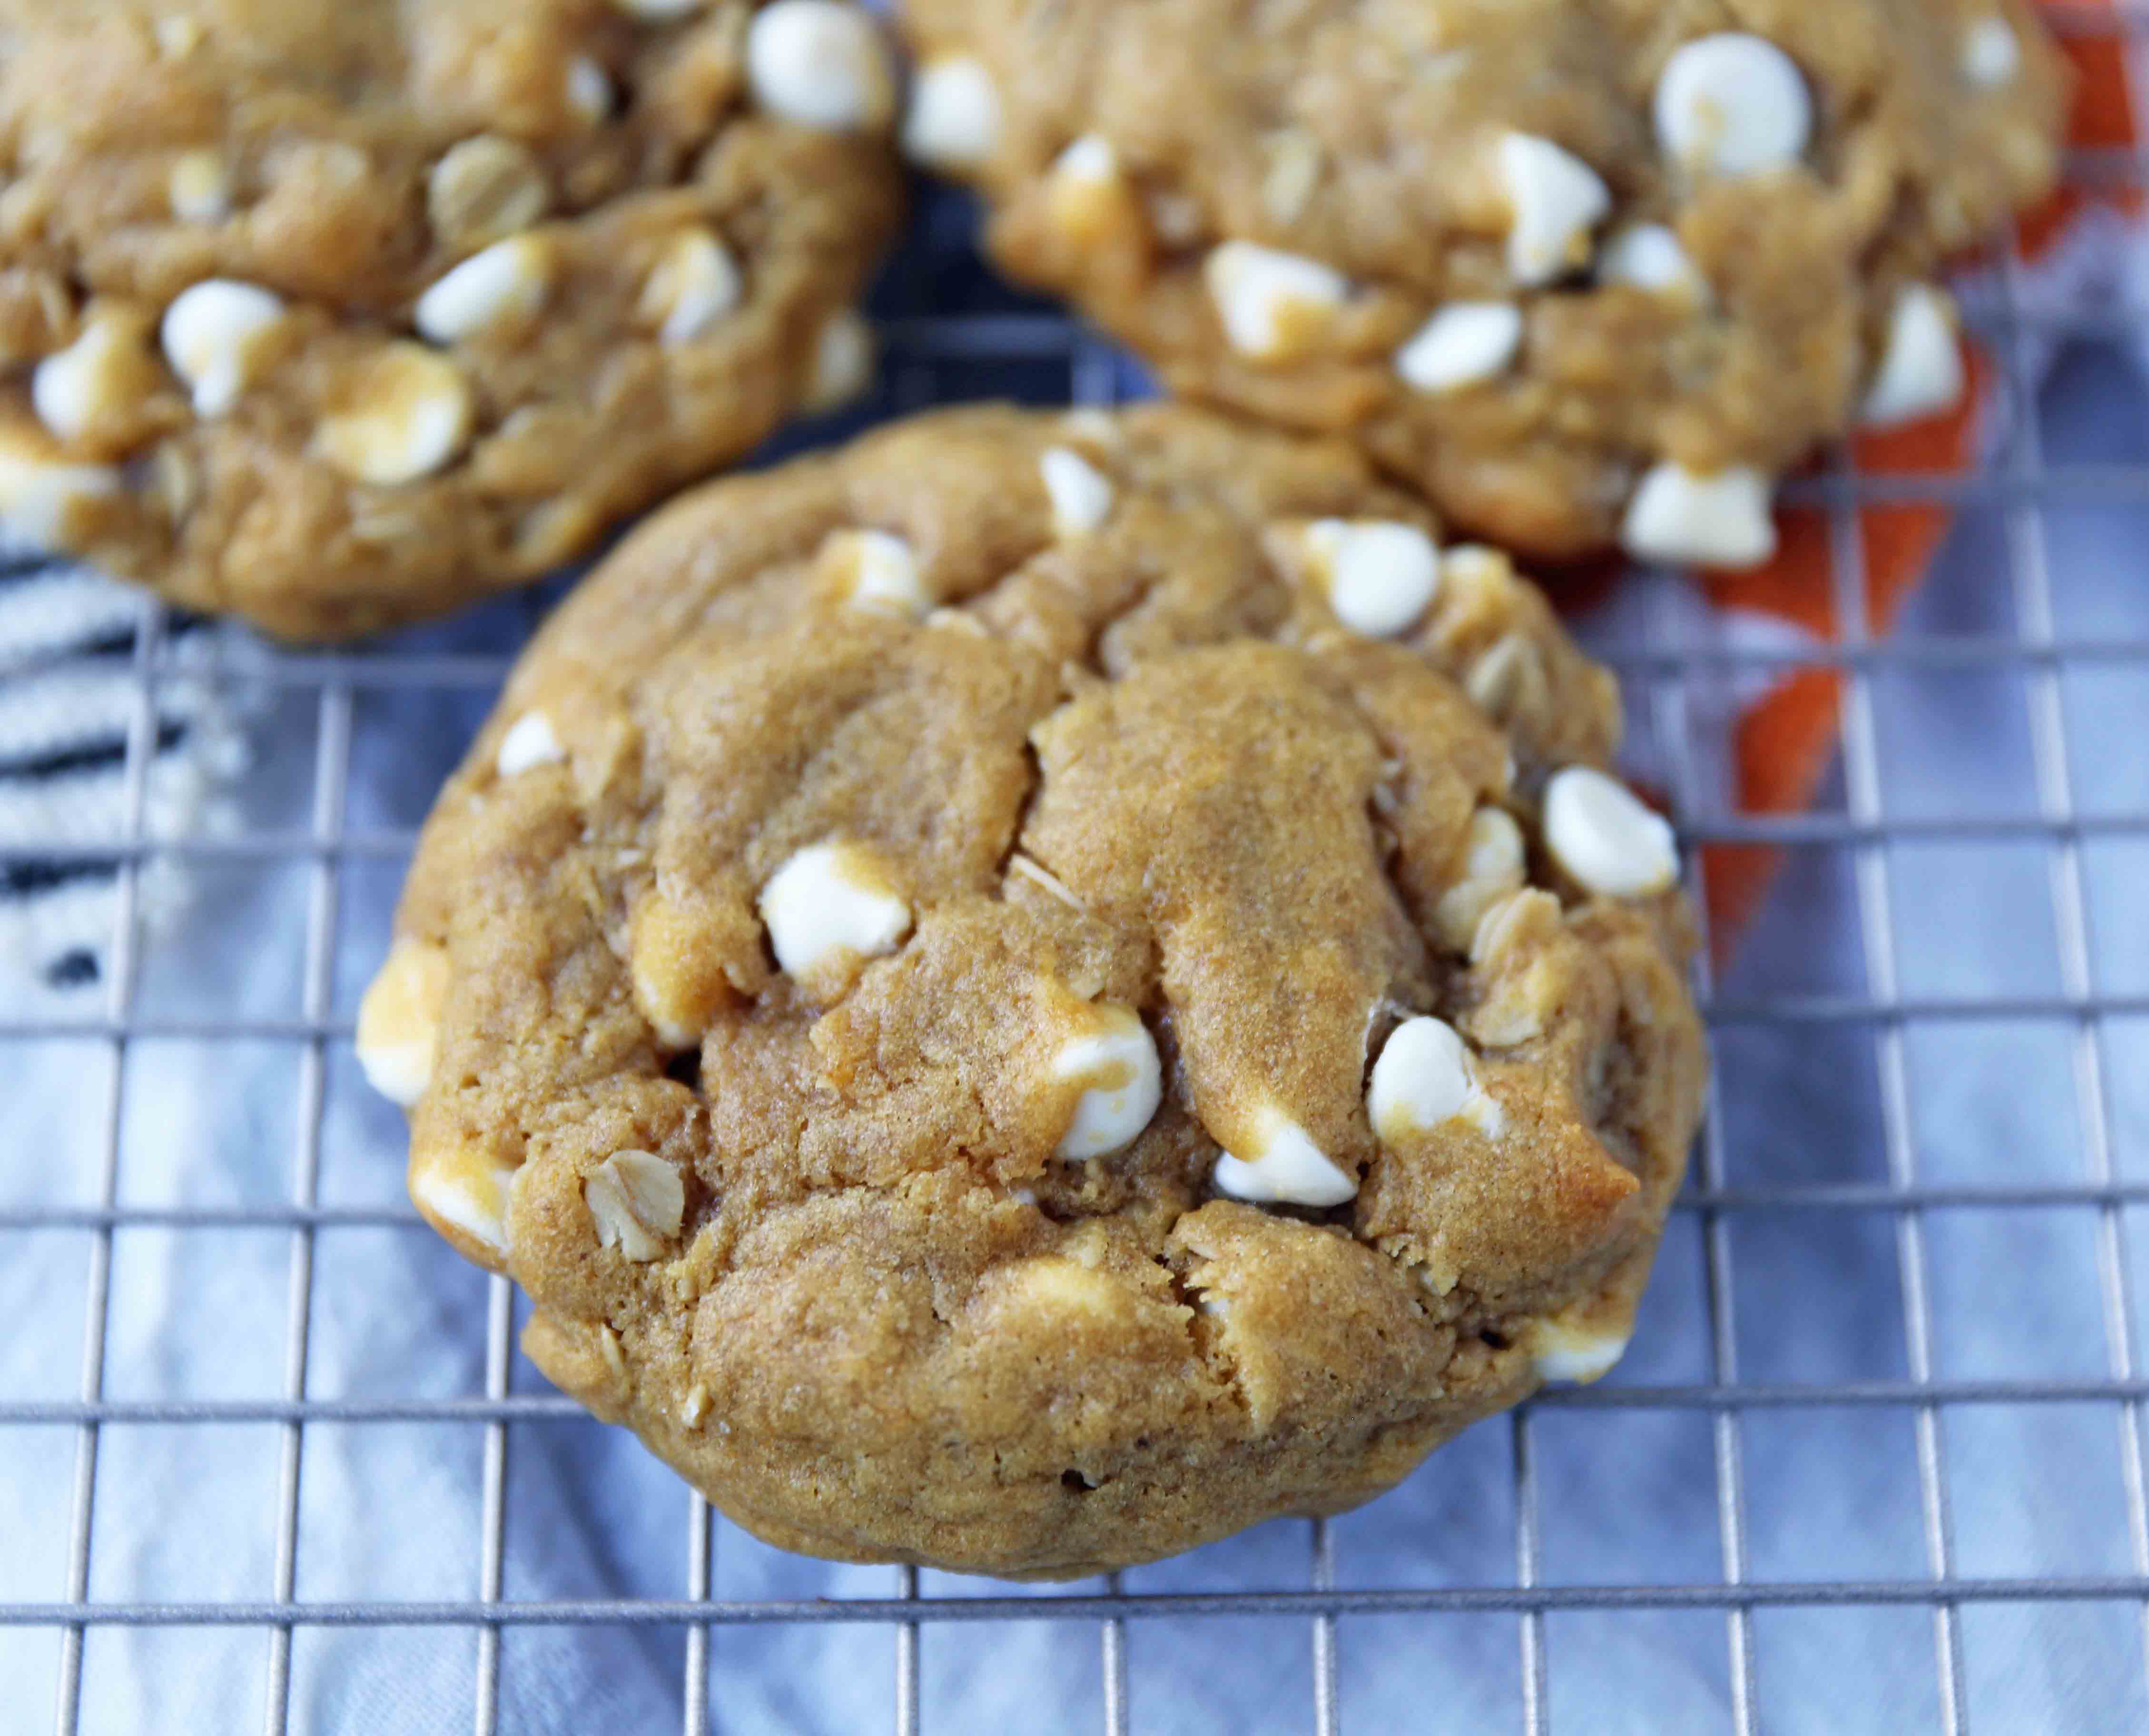 Pumpkin White Chocolate Chip Cookies Recipe. Soft and Chewy Pumpkin Oatmeal Cookies with White Chocolate Chips. The best chewy pumpkin cookies. www.modernhoney.com #pumpkincookies #pumpkinoatmealcookies #pumpkinwhitechocolatechipcookies #fallrecipes 